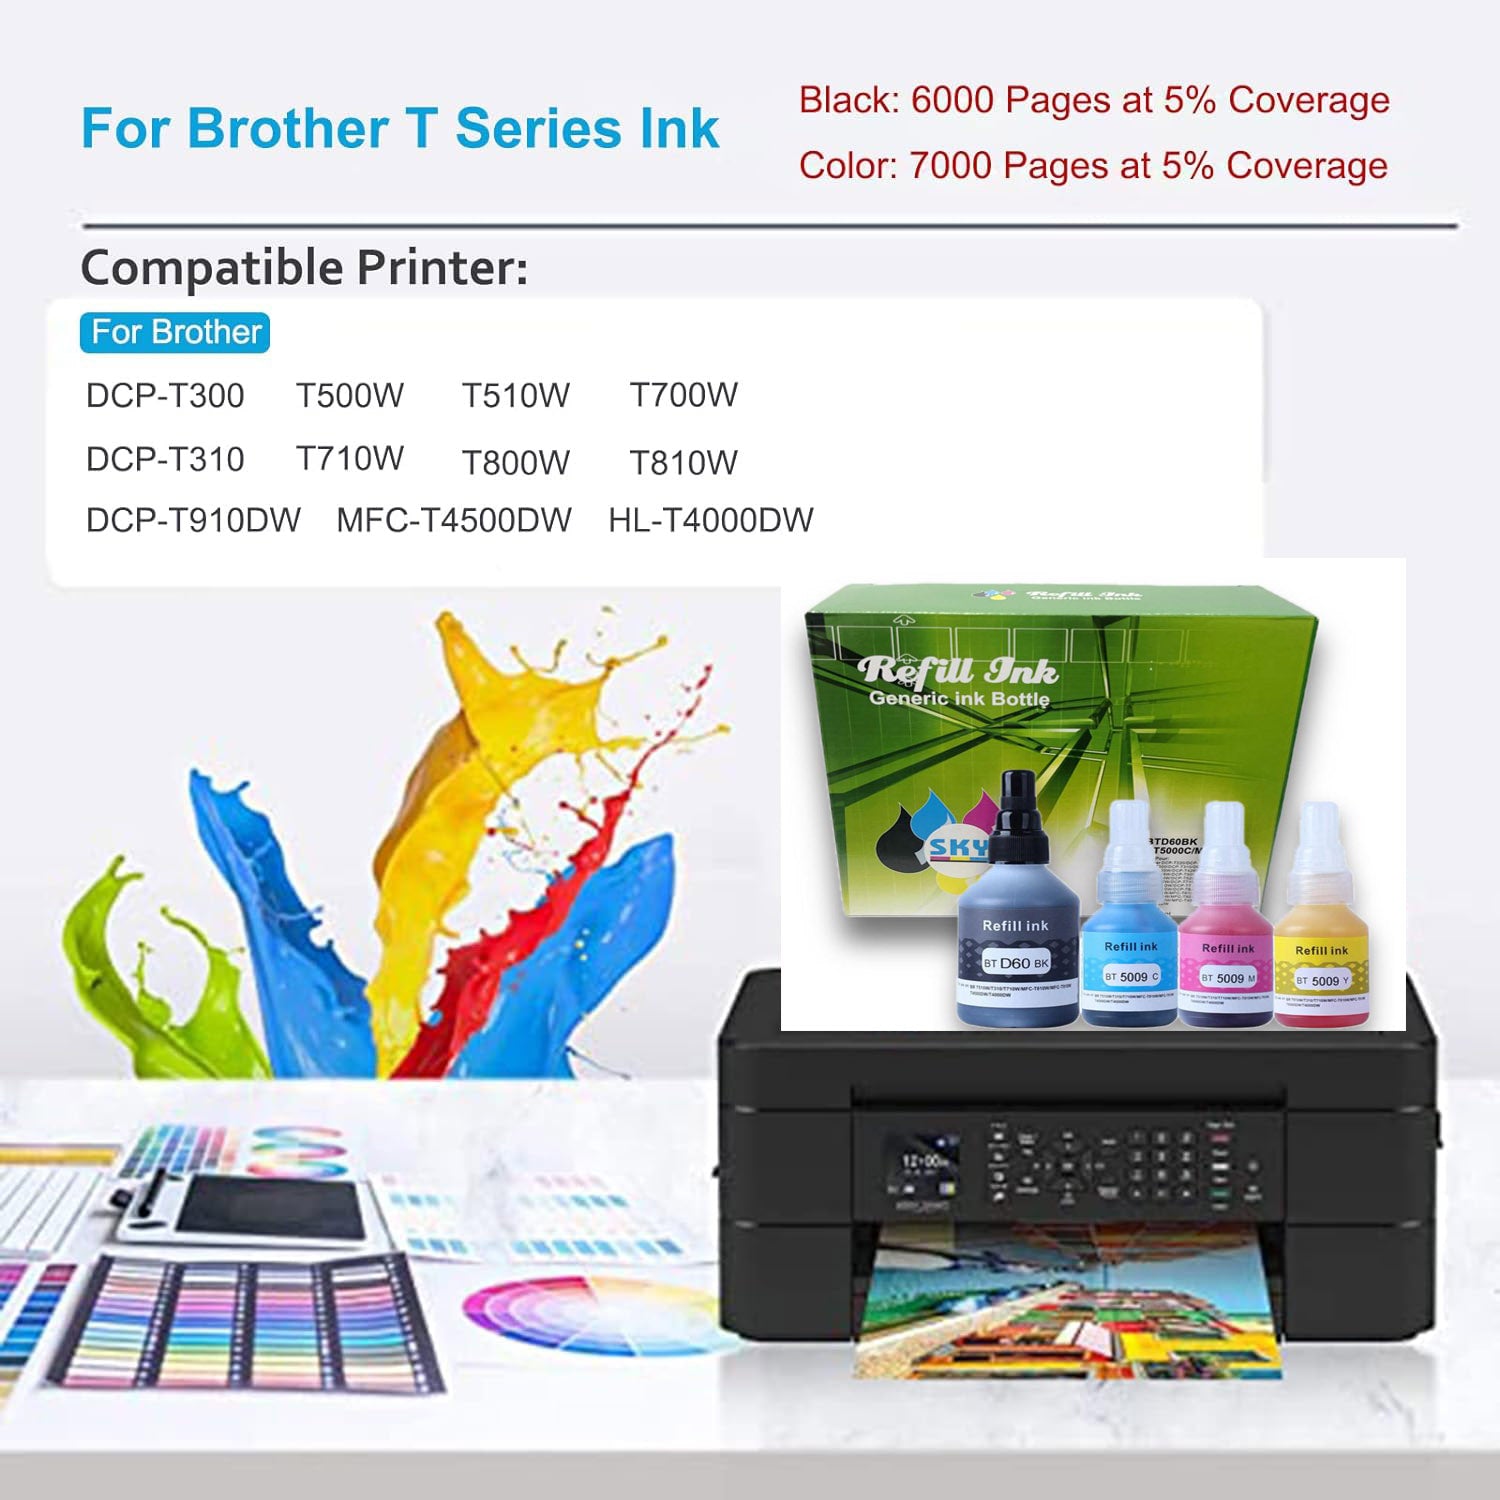 Compatible 4 Color Refill Ink  set for DCP-T310, T510W, T710W  MFC-T810W Ink Tank Printers